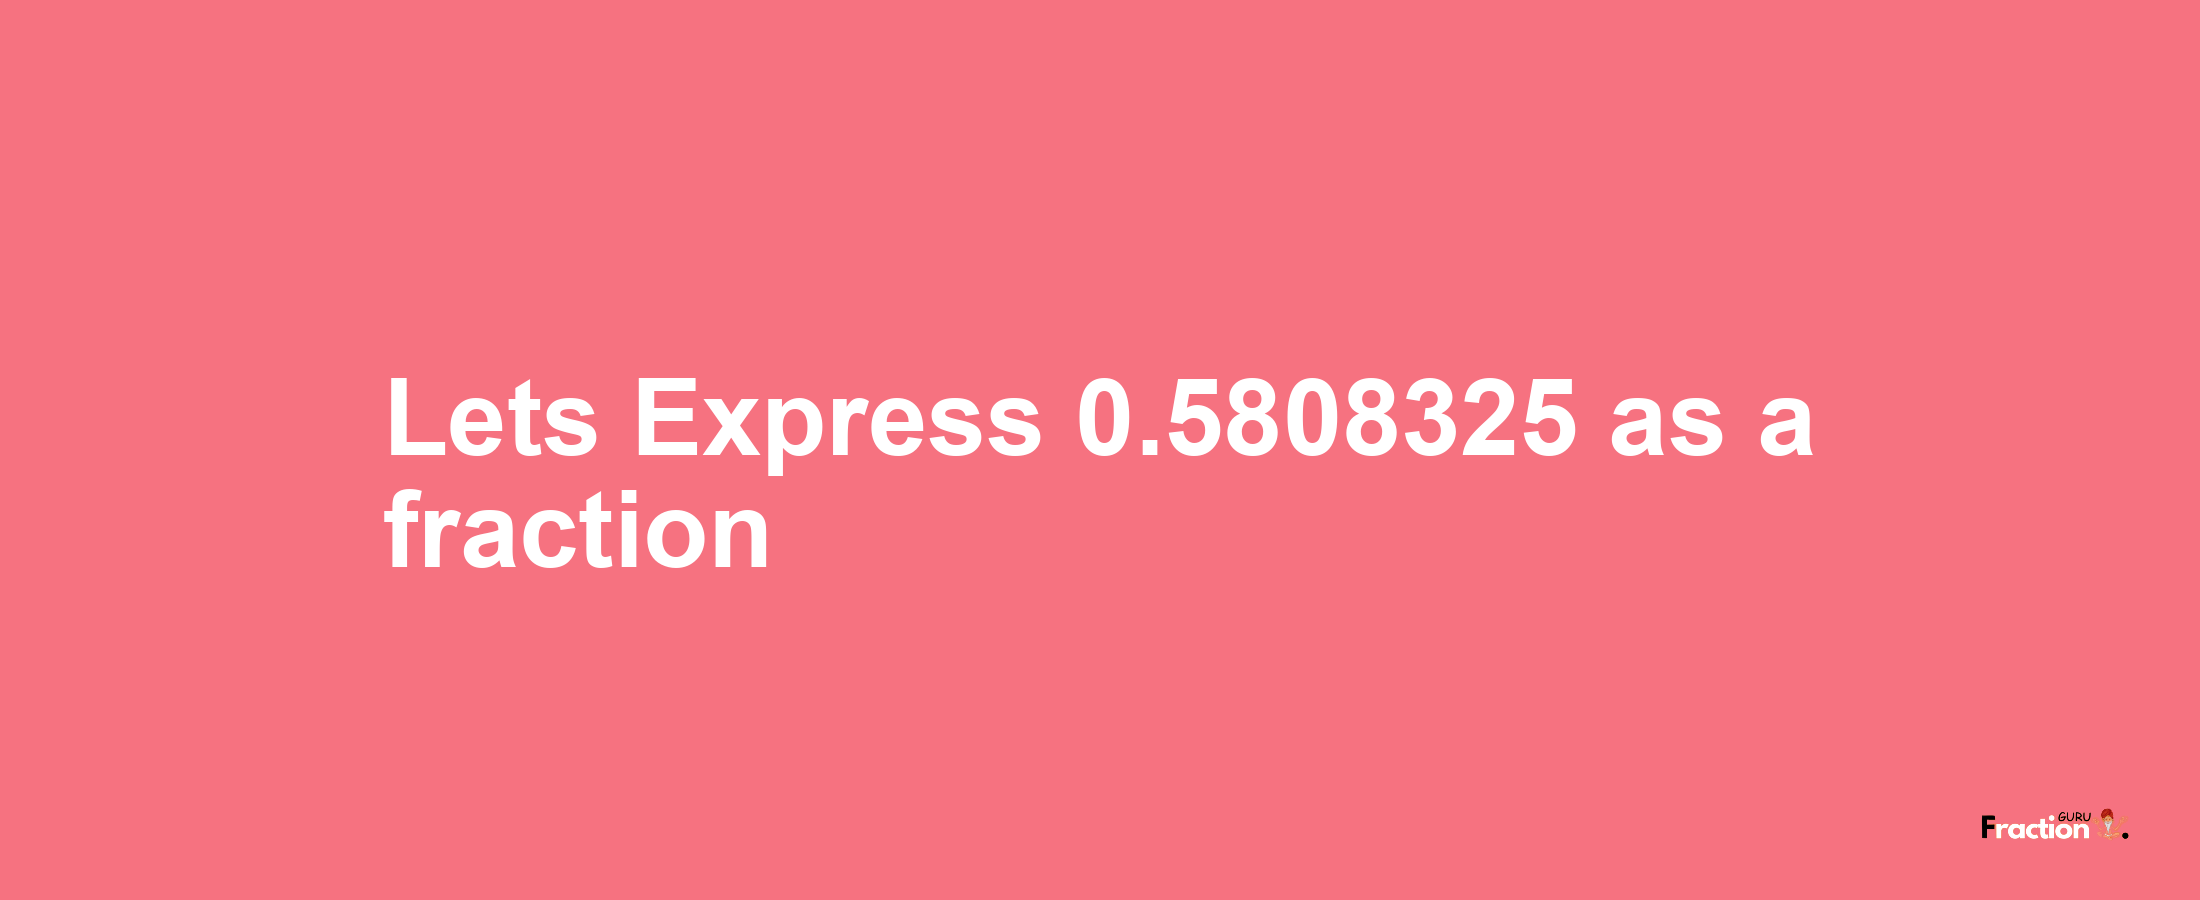 Lets Express 0.5808325 as afraction